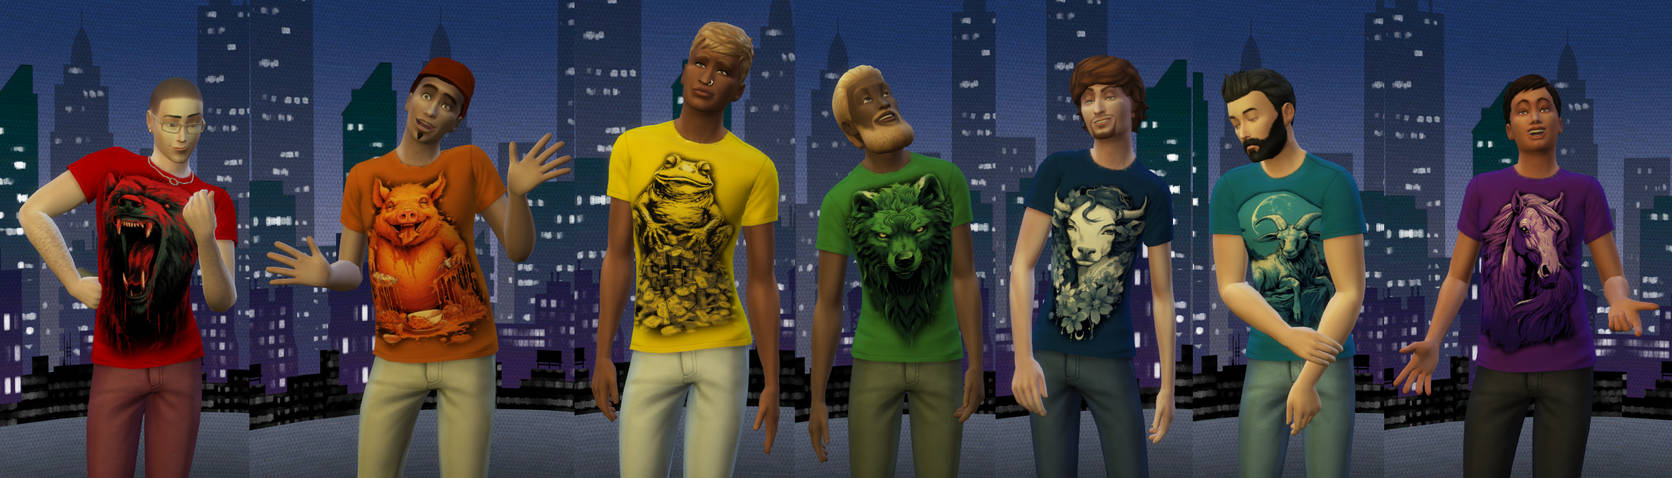 7 Deadly Sims T-Shirt